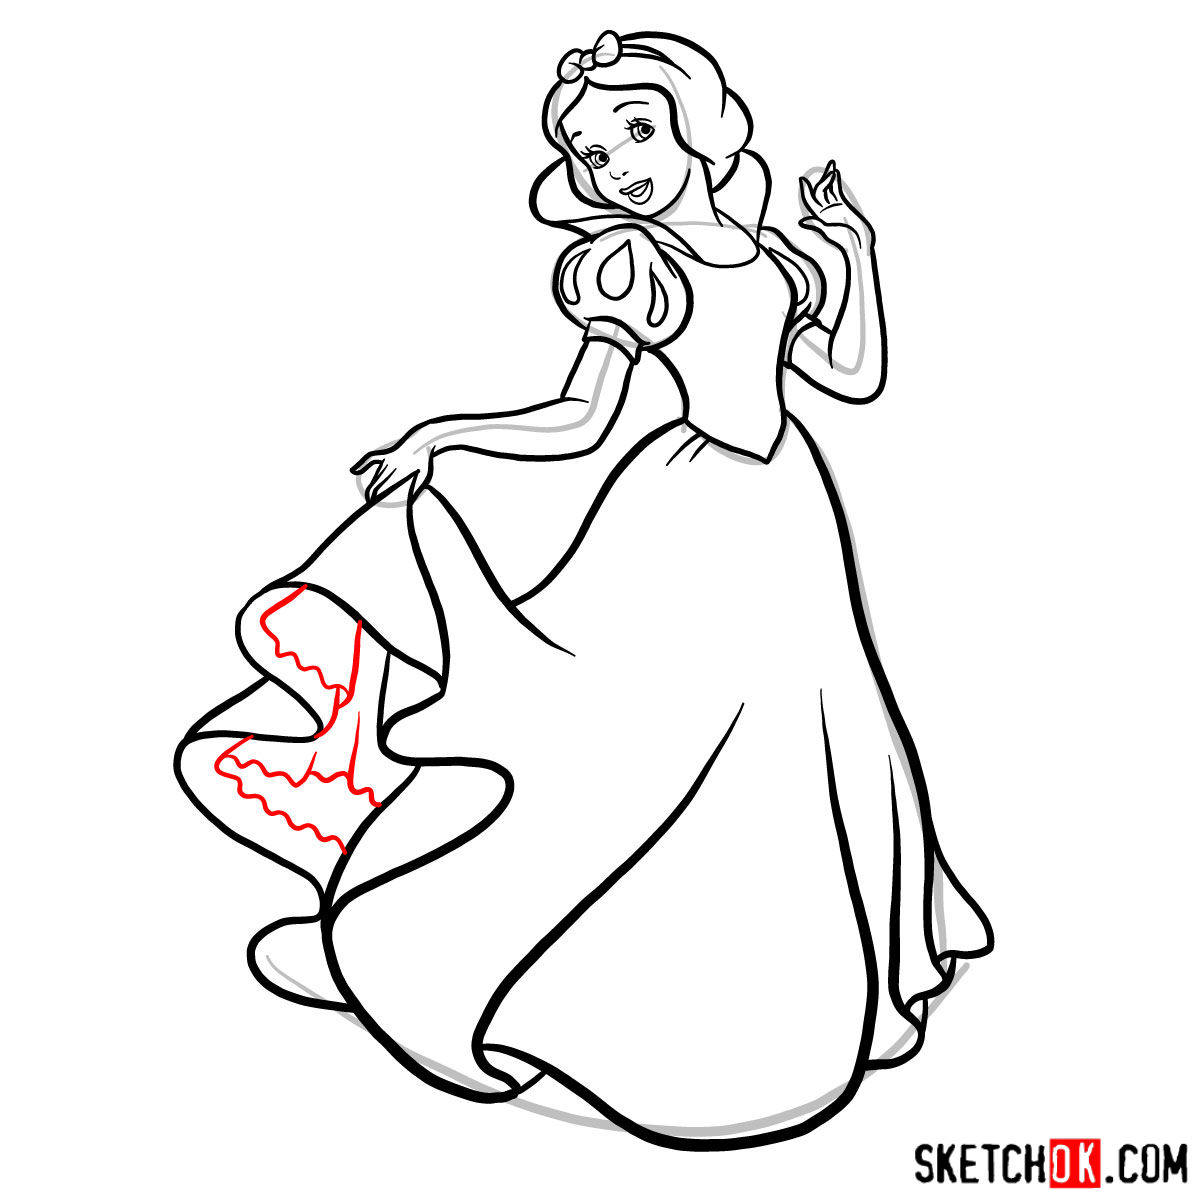 How to draw Snow White - step 13